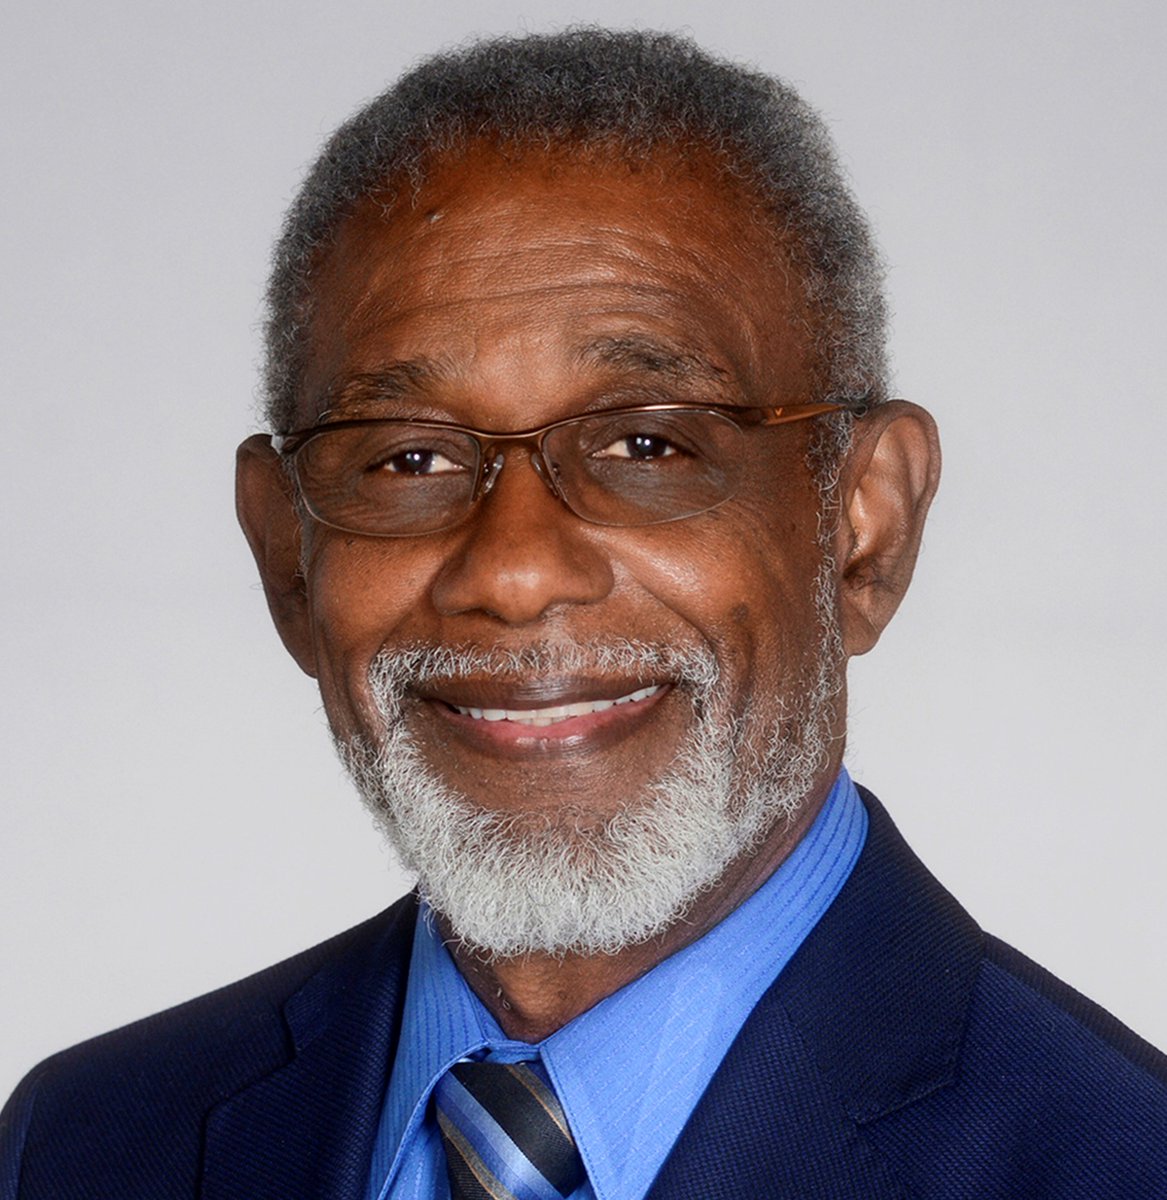 Sincere thanks to @ISHVnews DEI Advisor, @CleveFrancis for his tireless advocacy for DEI principles in healthcare through publications & presentations, & efforts to eliminate disparities and create a diverse, bias free workforce. @muzicdoc2 medscape.com/viewarticle/10…